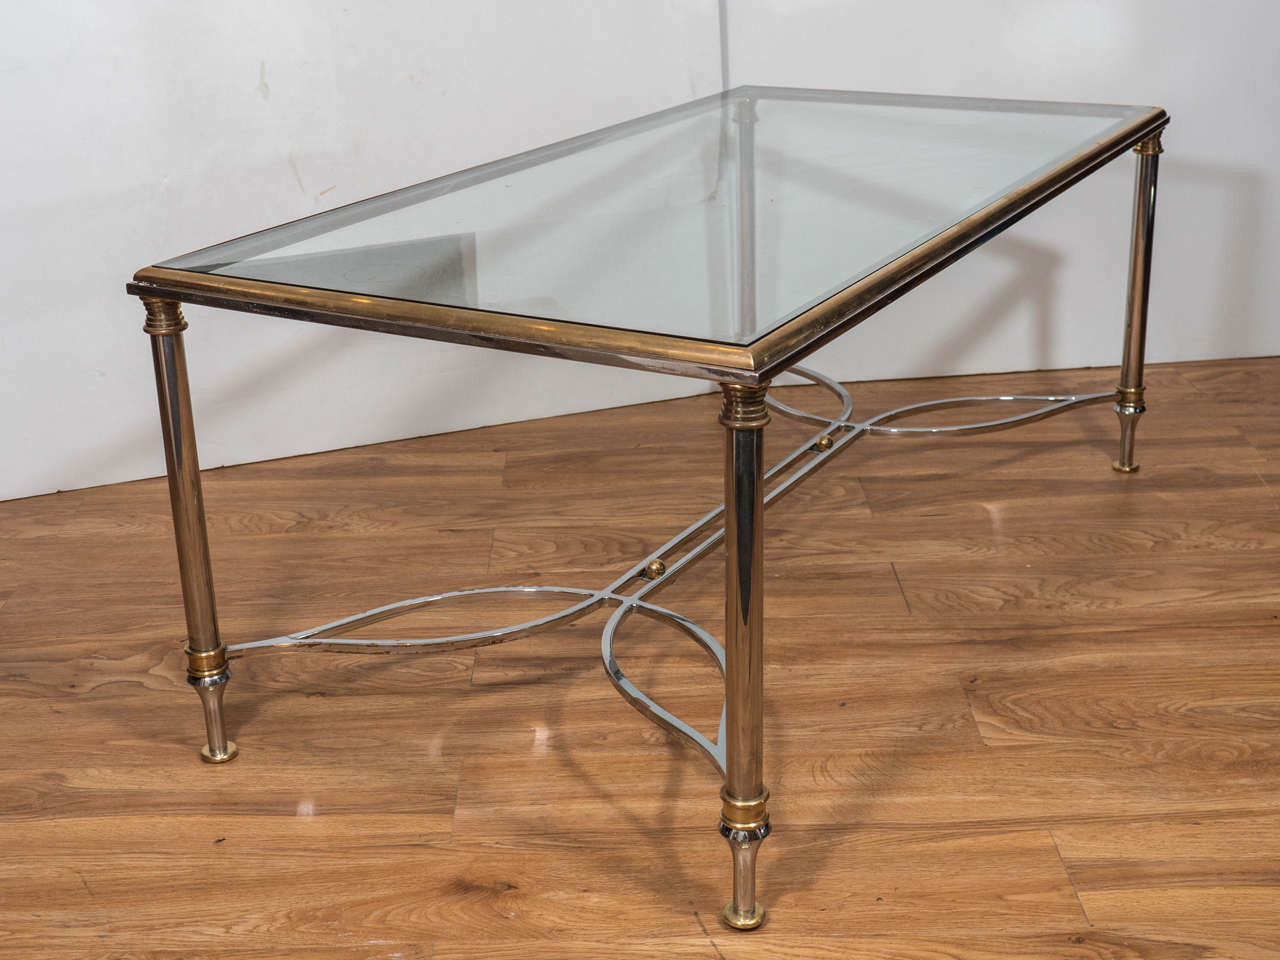 A vintage brass rectangular coffee or cocktail table with elegant chrome base and glass top. Good condition, wear consistent with age and use.

There is damage to the glass on one corner.